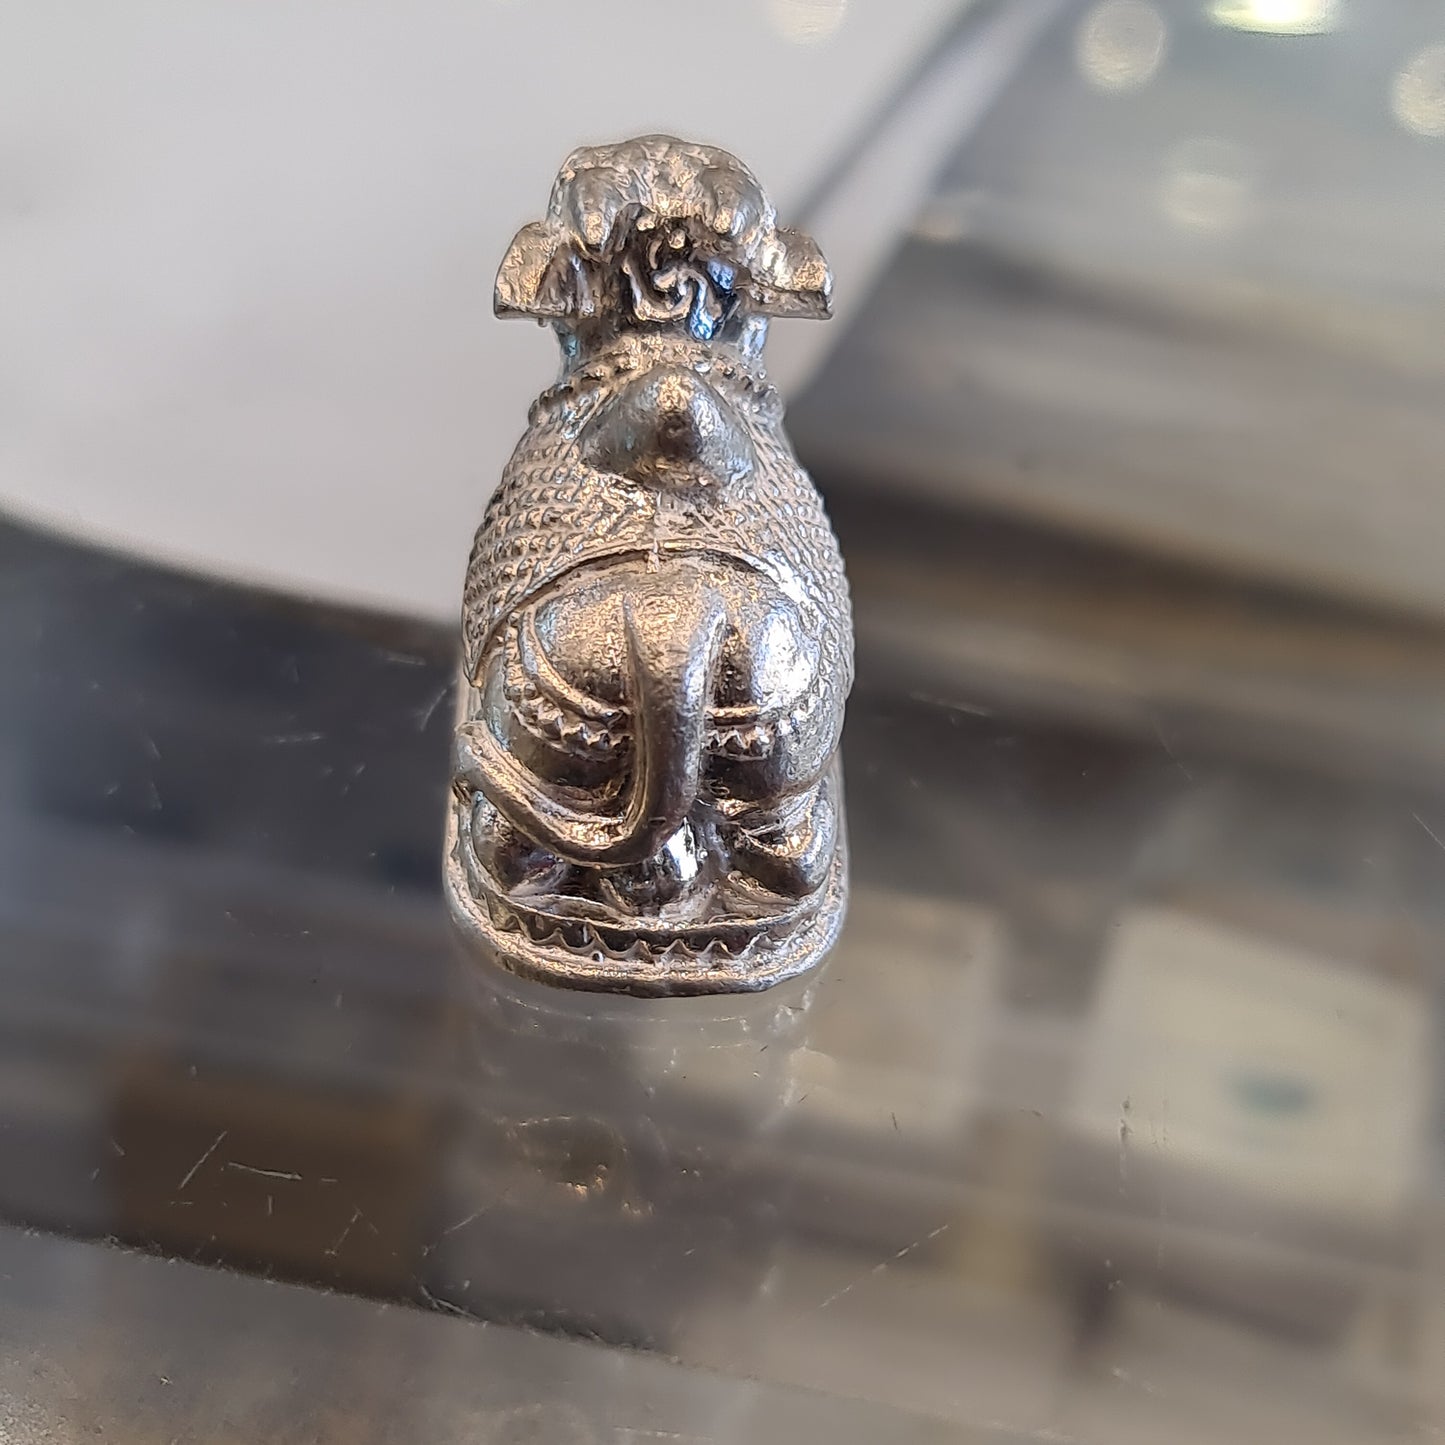 "Shimmering Serenity: The Beauty of a Solid Silver Nandi Idol"